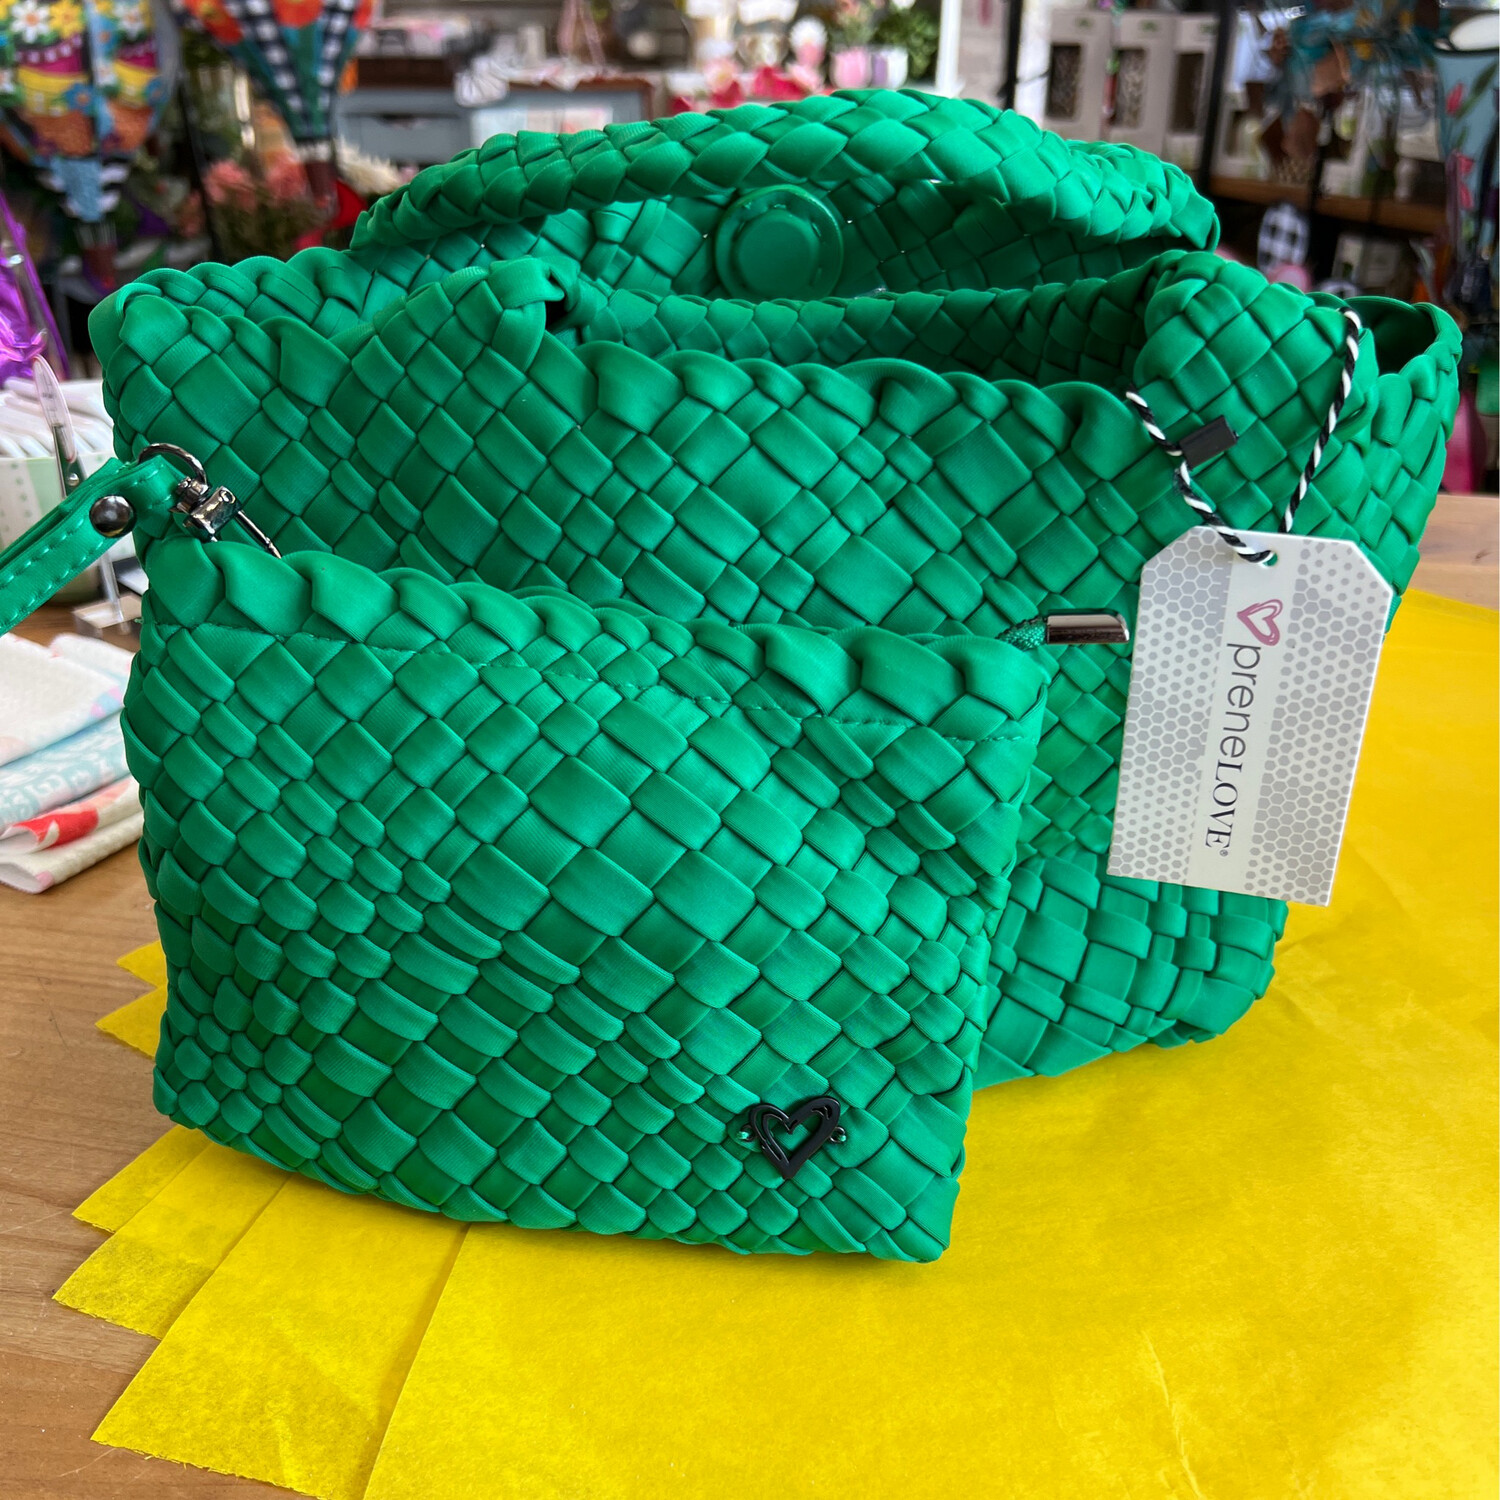 preneLOVE Woven Small Tote-FINAL CLEARANCE